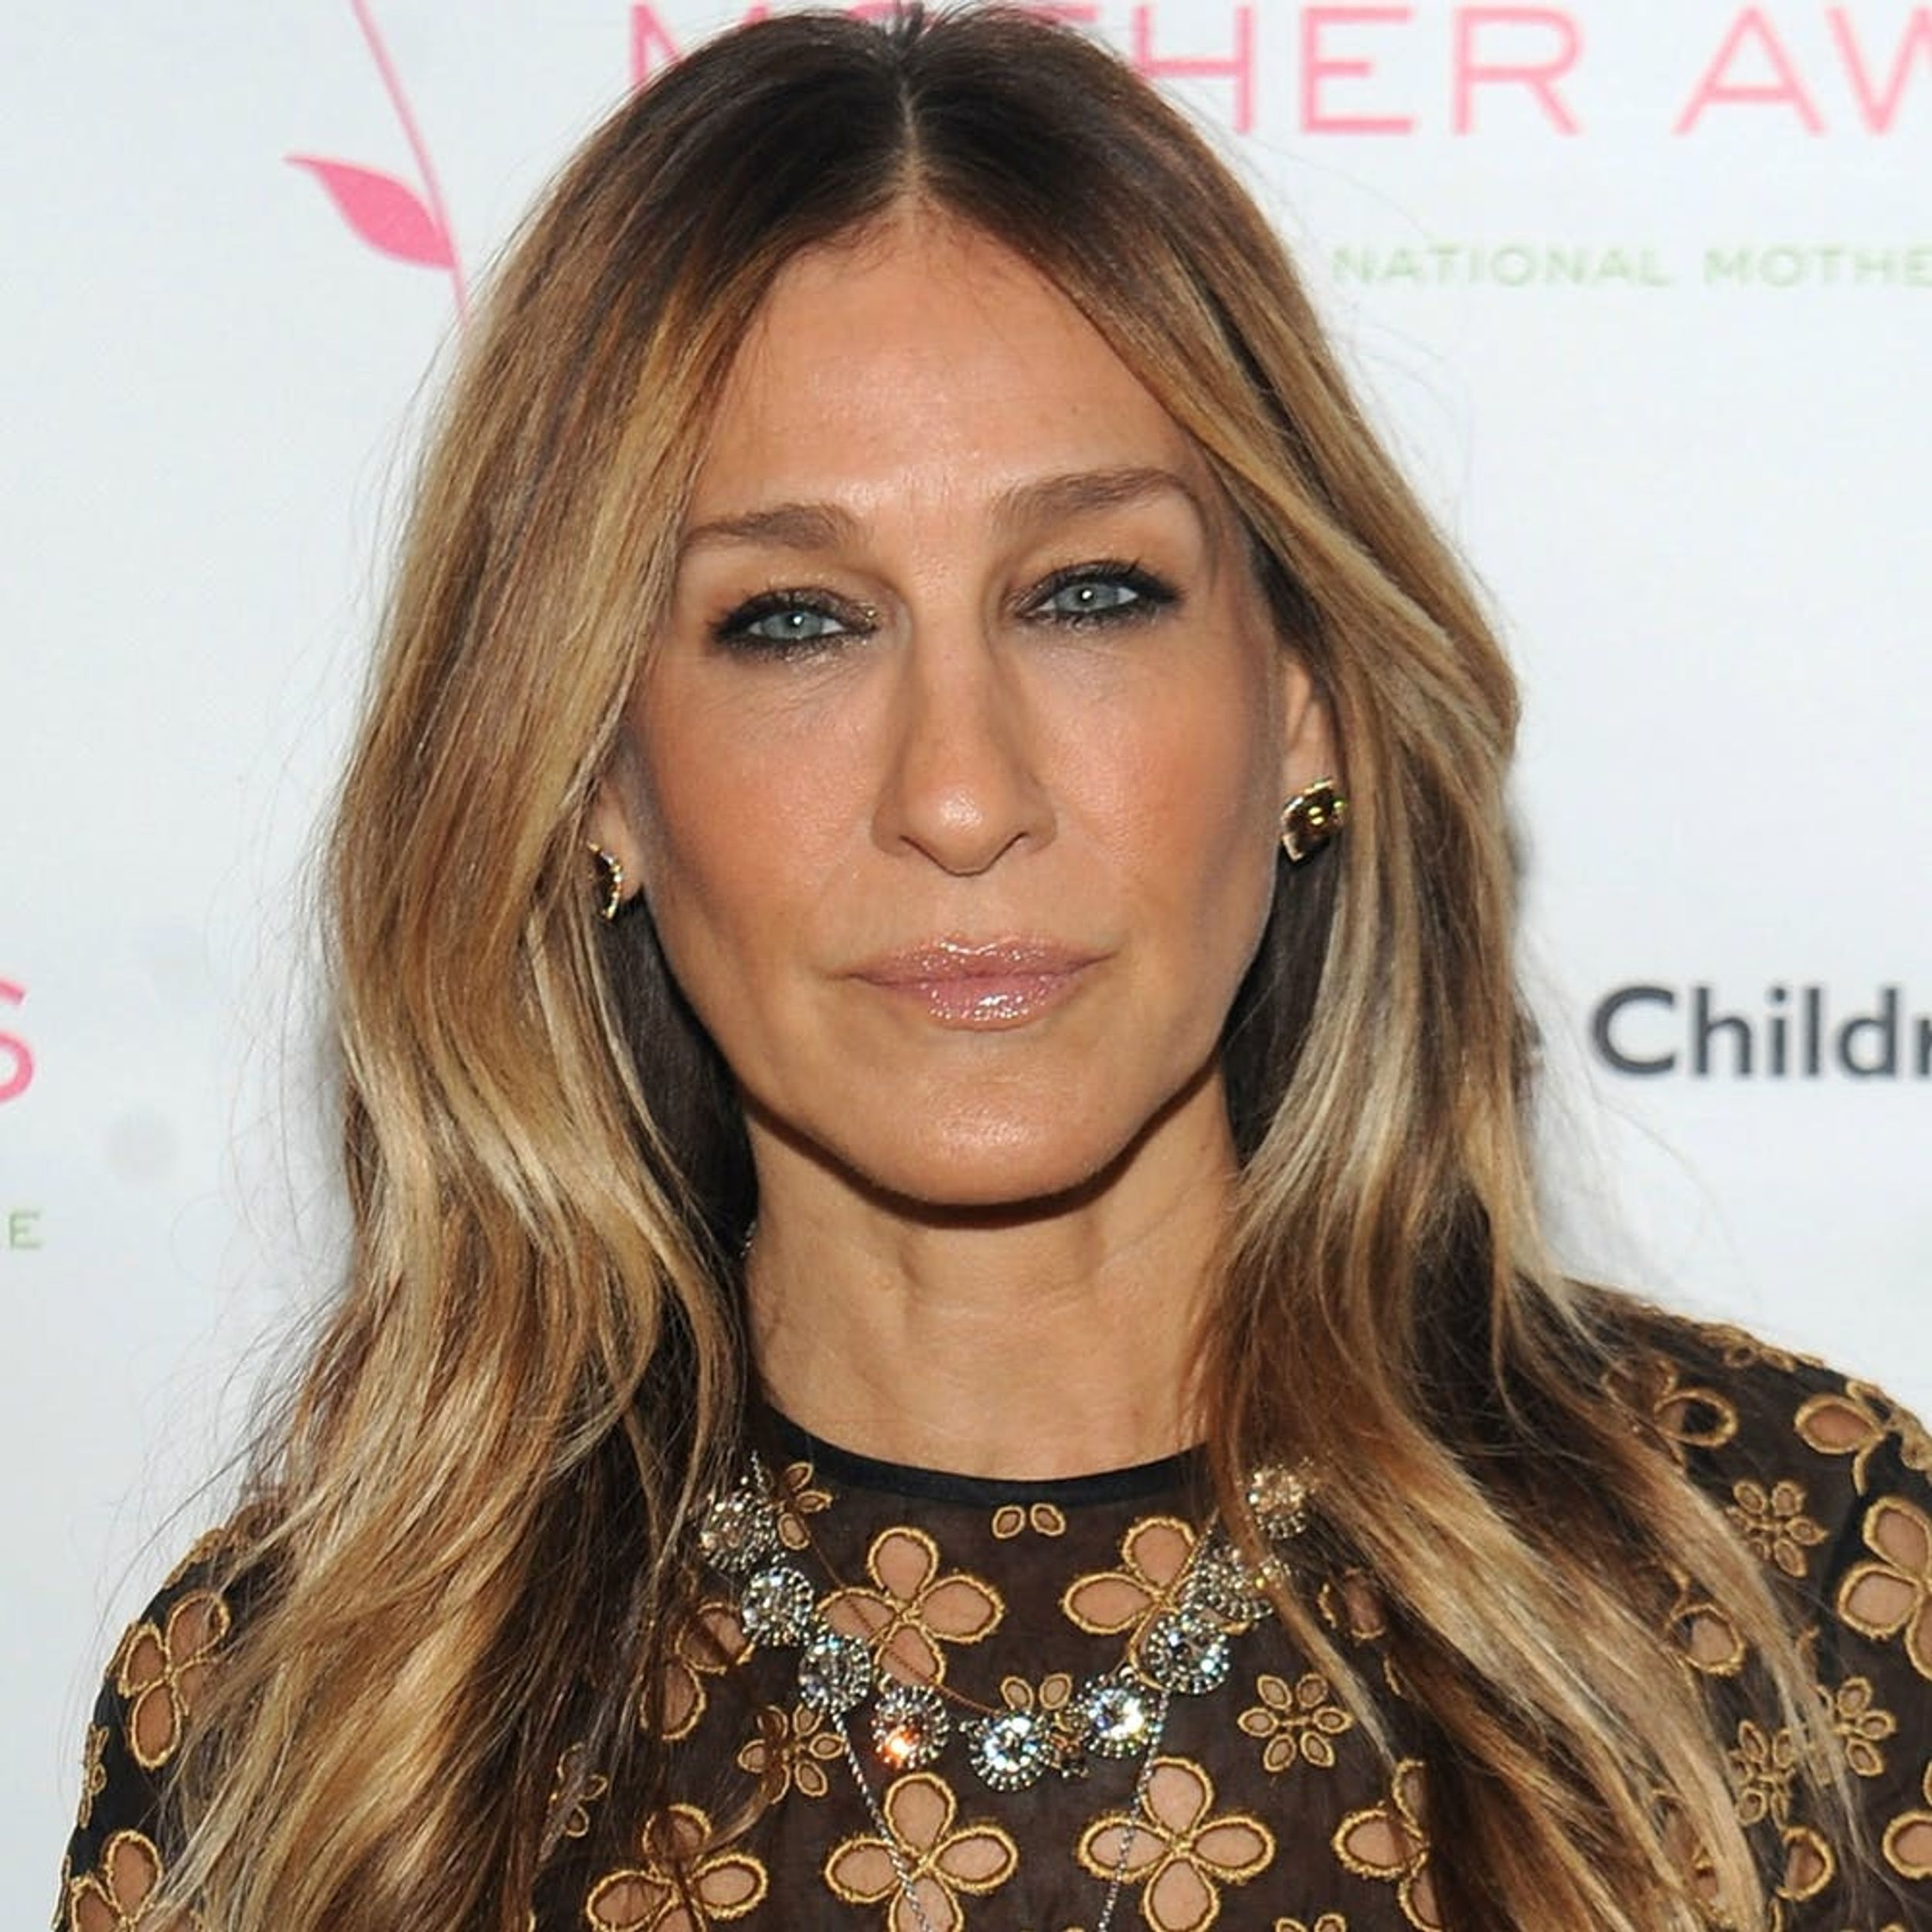 This Is the *One* Outfit Sarah Jessica Parker Regrets Wearing